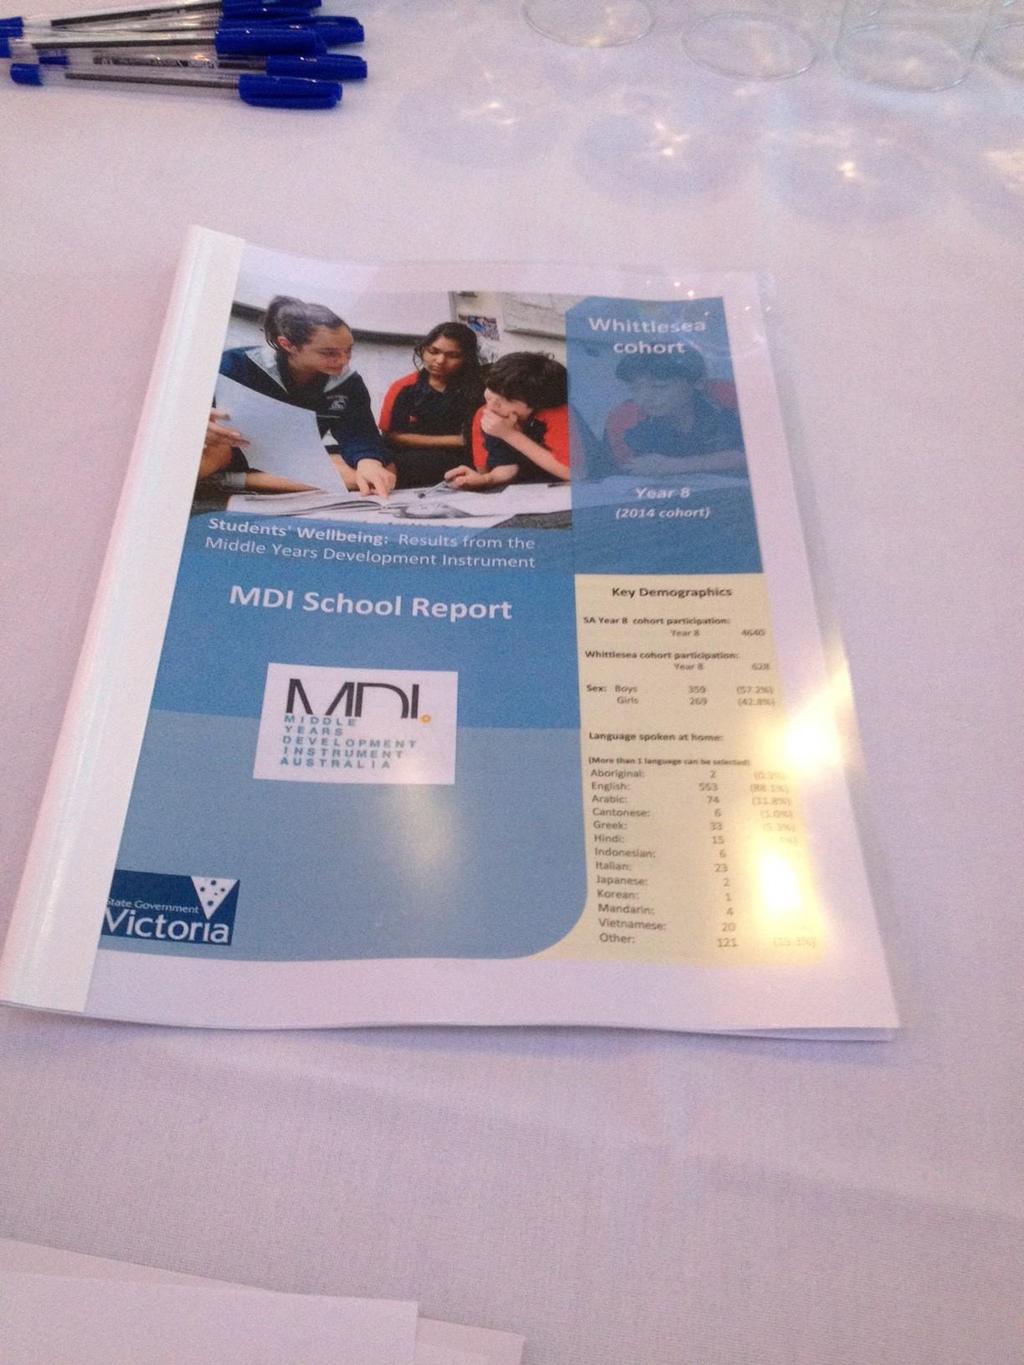 Strengthening our Understanding of Middle Years through the MDI What is the MDI?